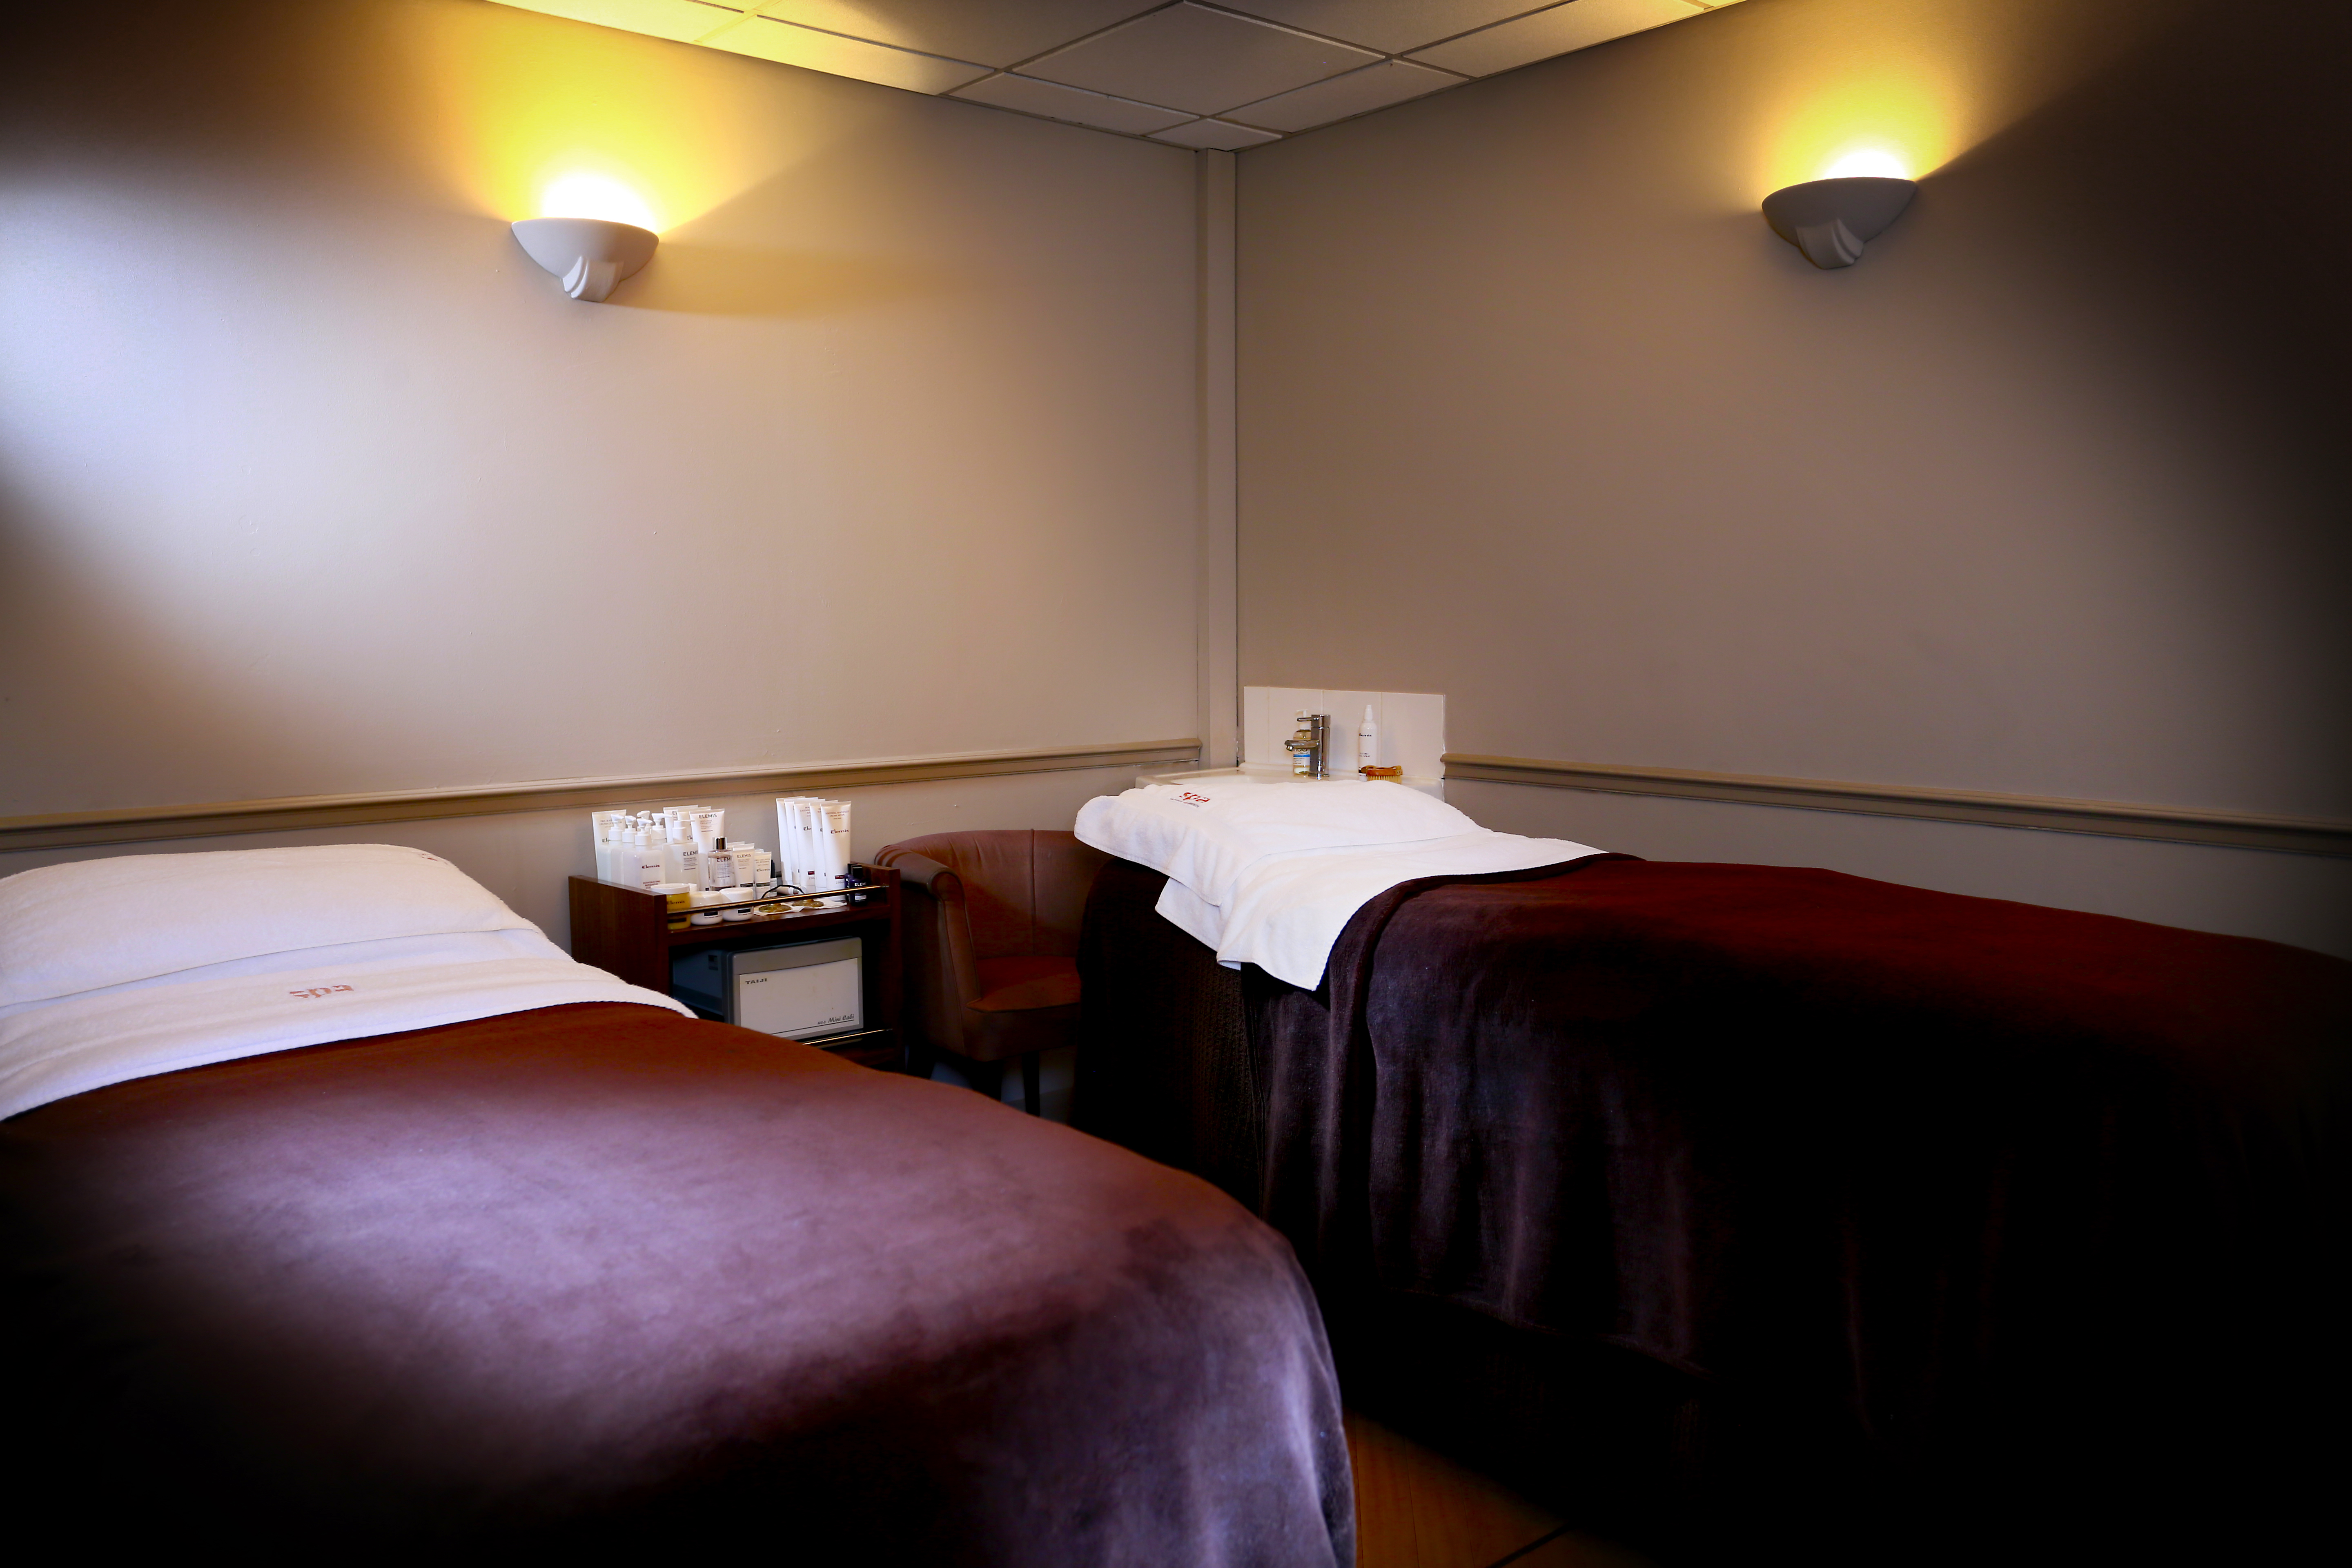 1 Night The Essential Spa Break For Two, Macdonald Botley Park Hotel A